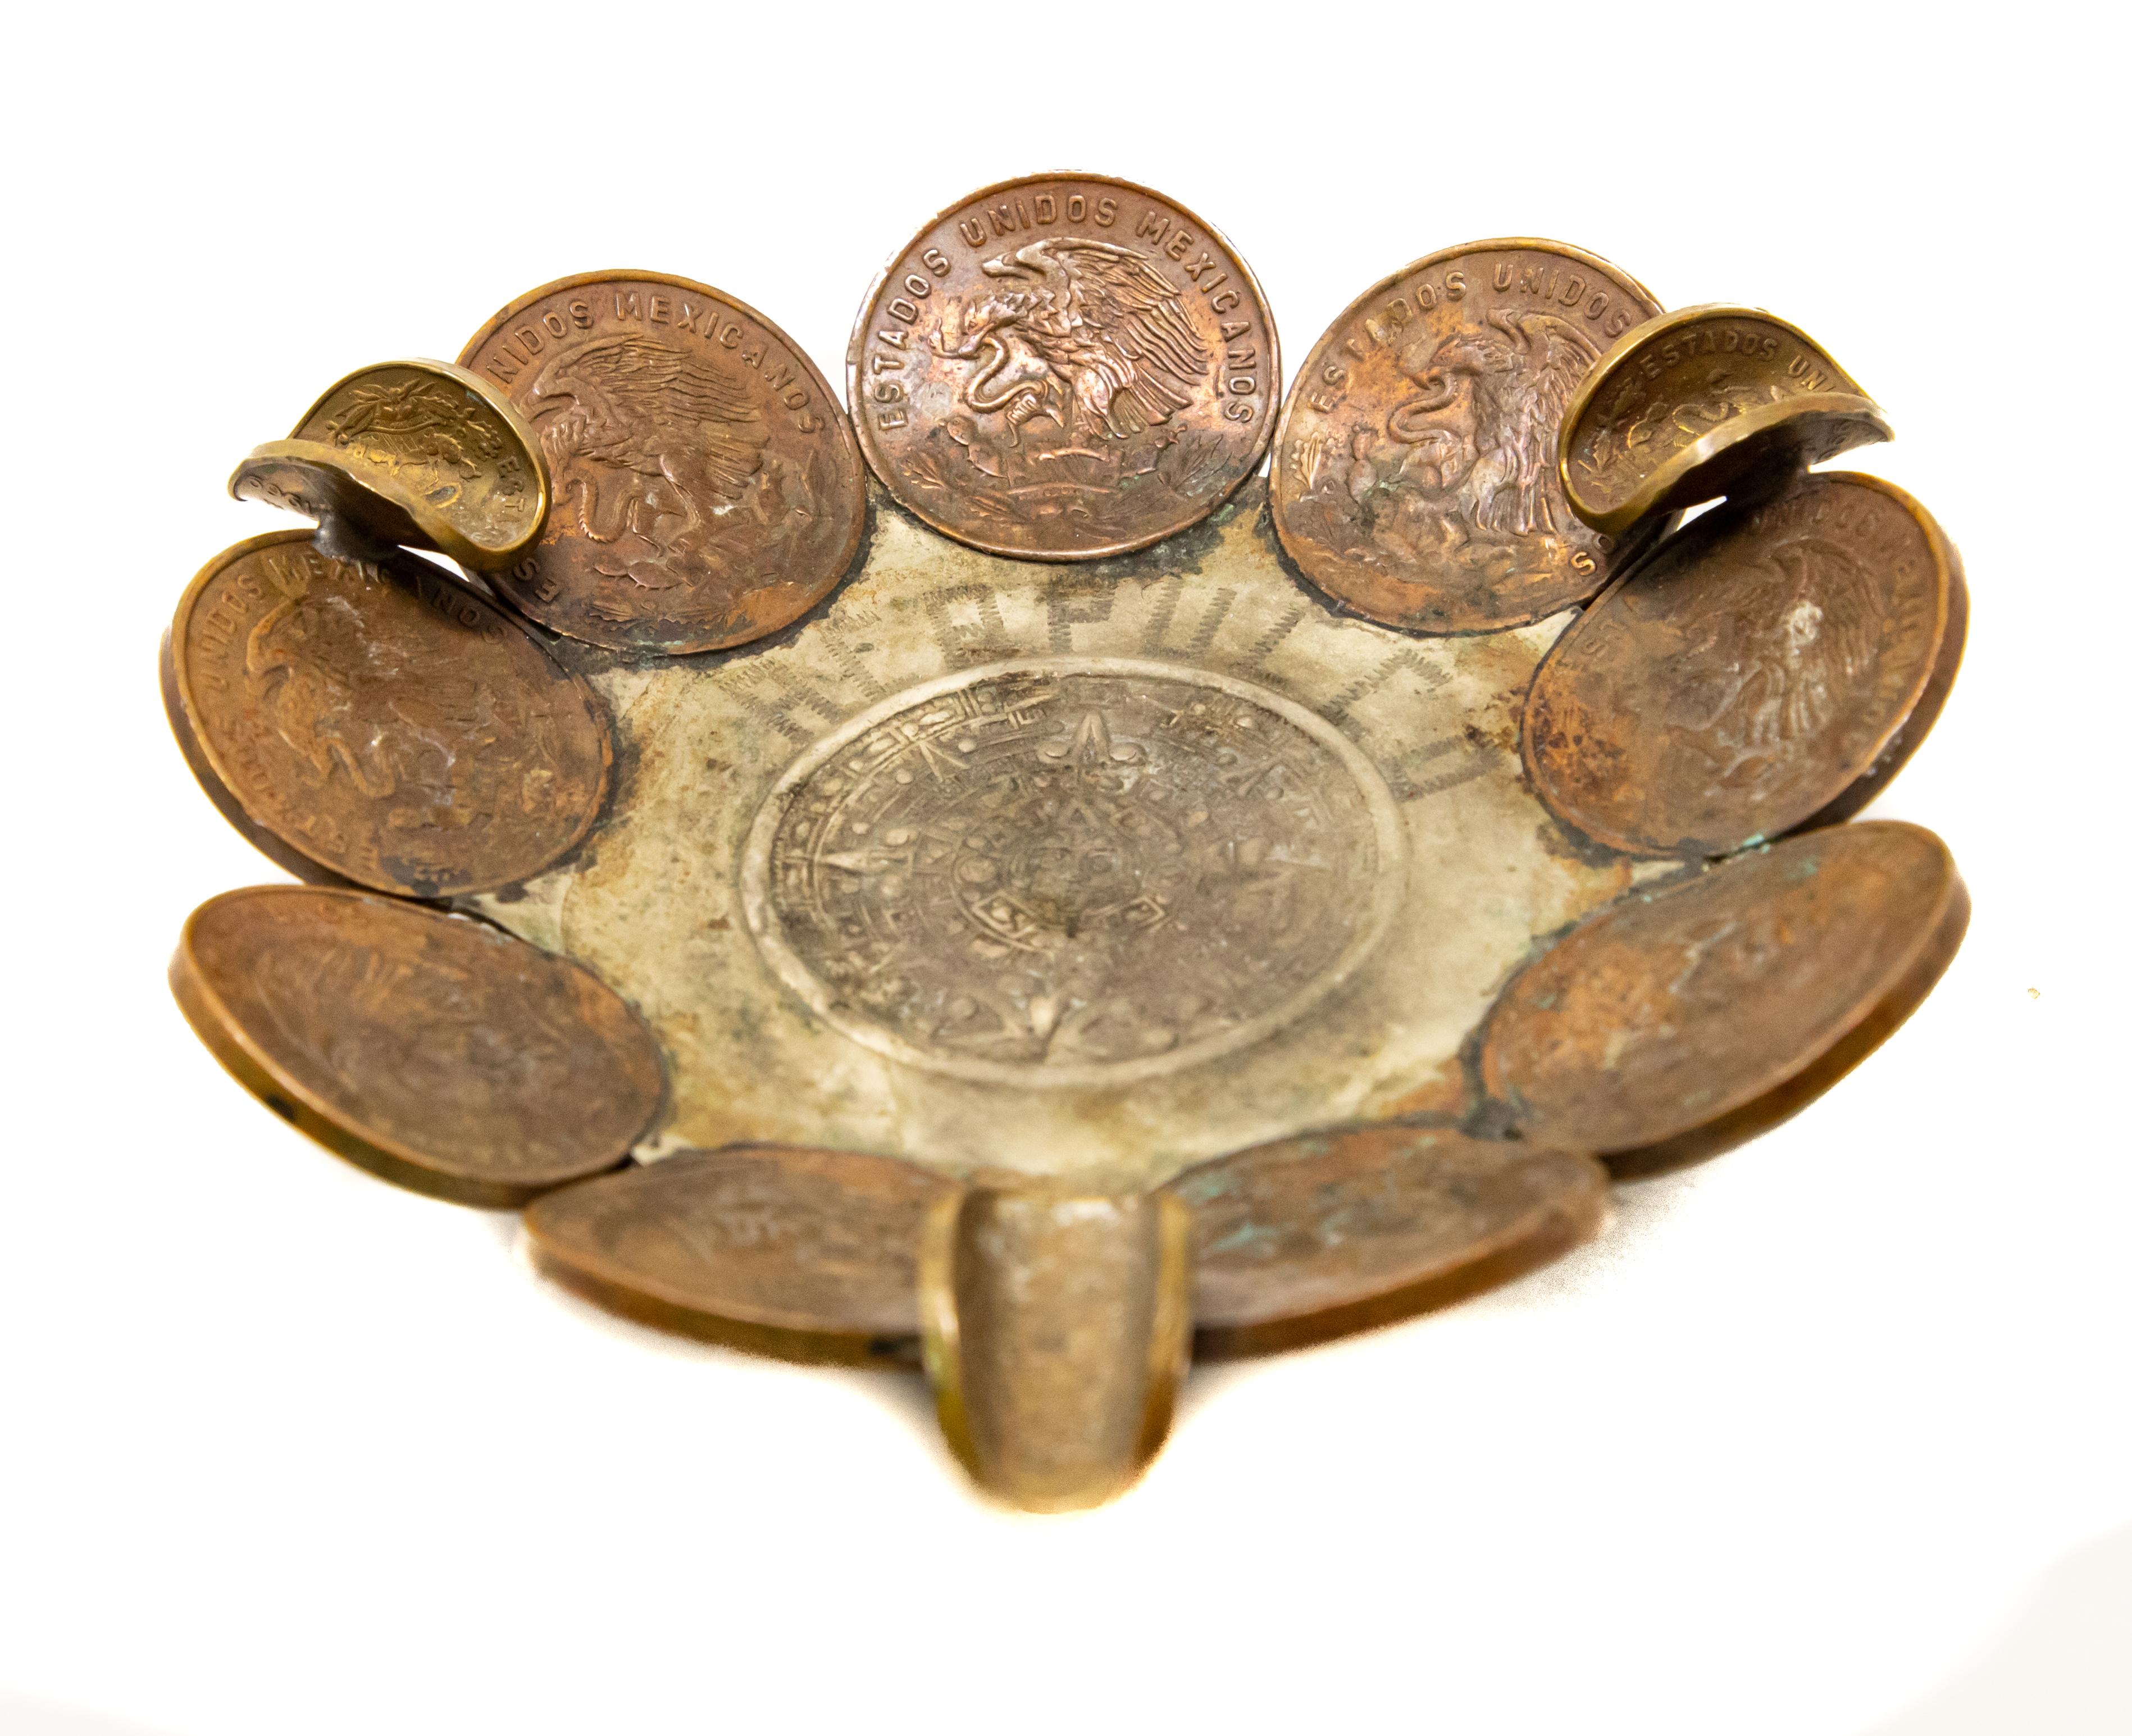 Offering this ashtray made with Mexican Pesos'. Start with three five cent pesos as the feet. The main body is made up of nine, twenty cent pesos. And has three more five cent pesos as the holder. The center is stamped with a Mayan relief and